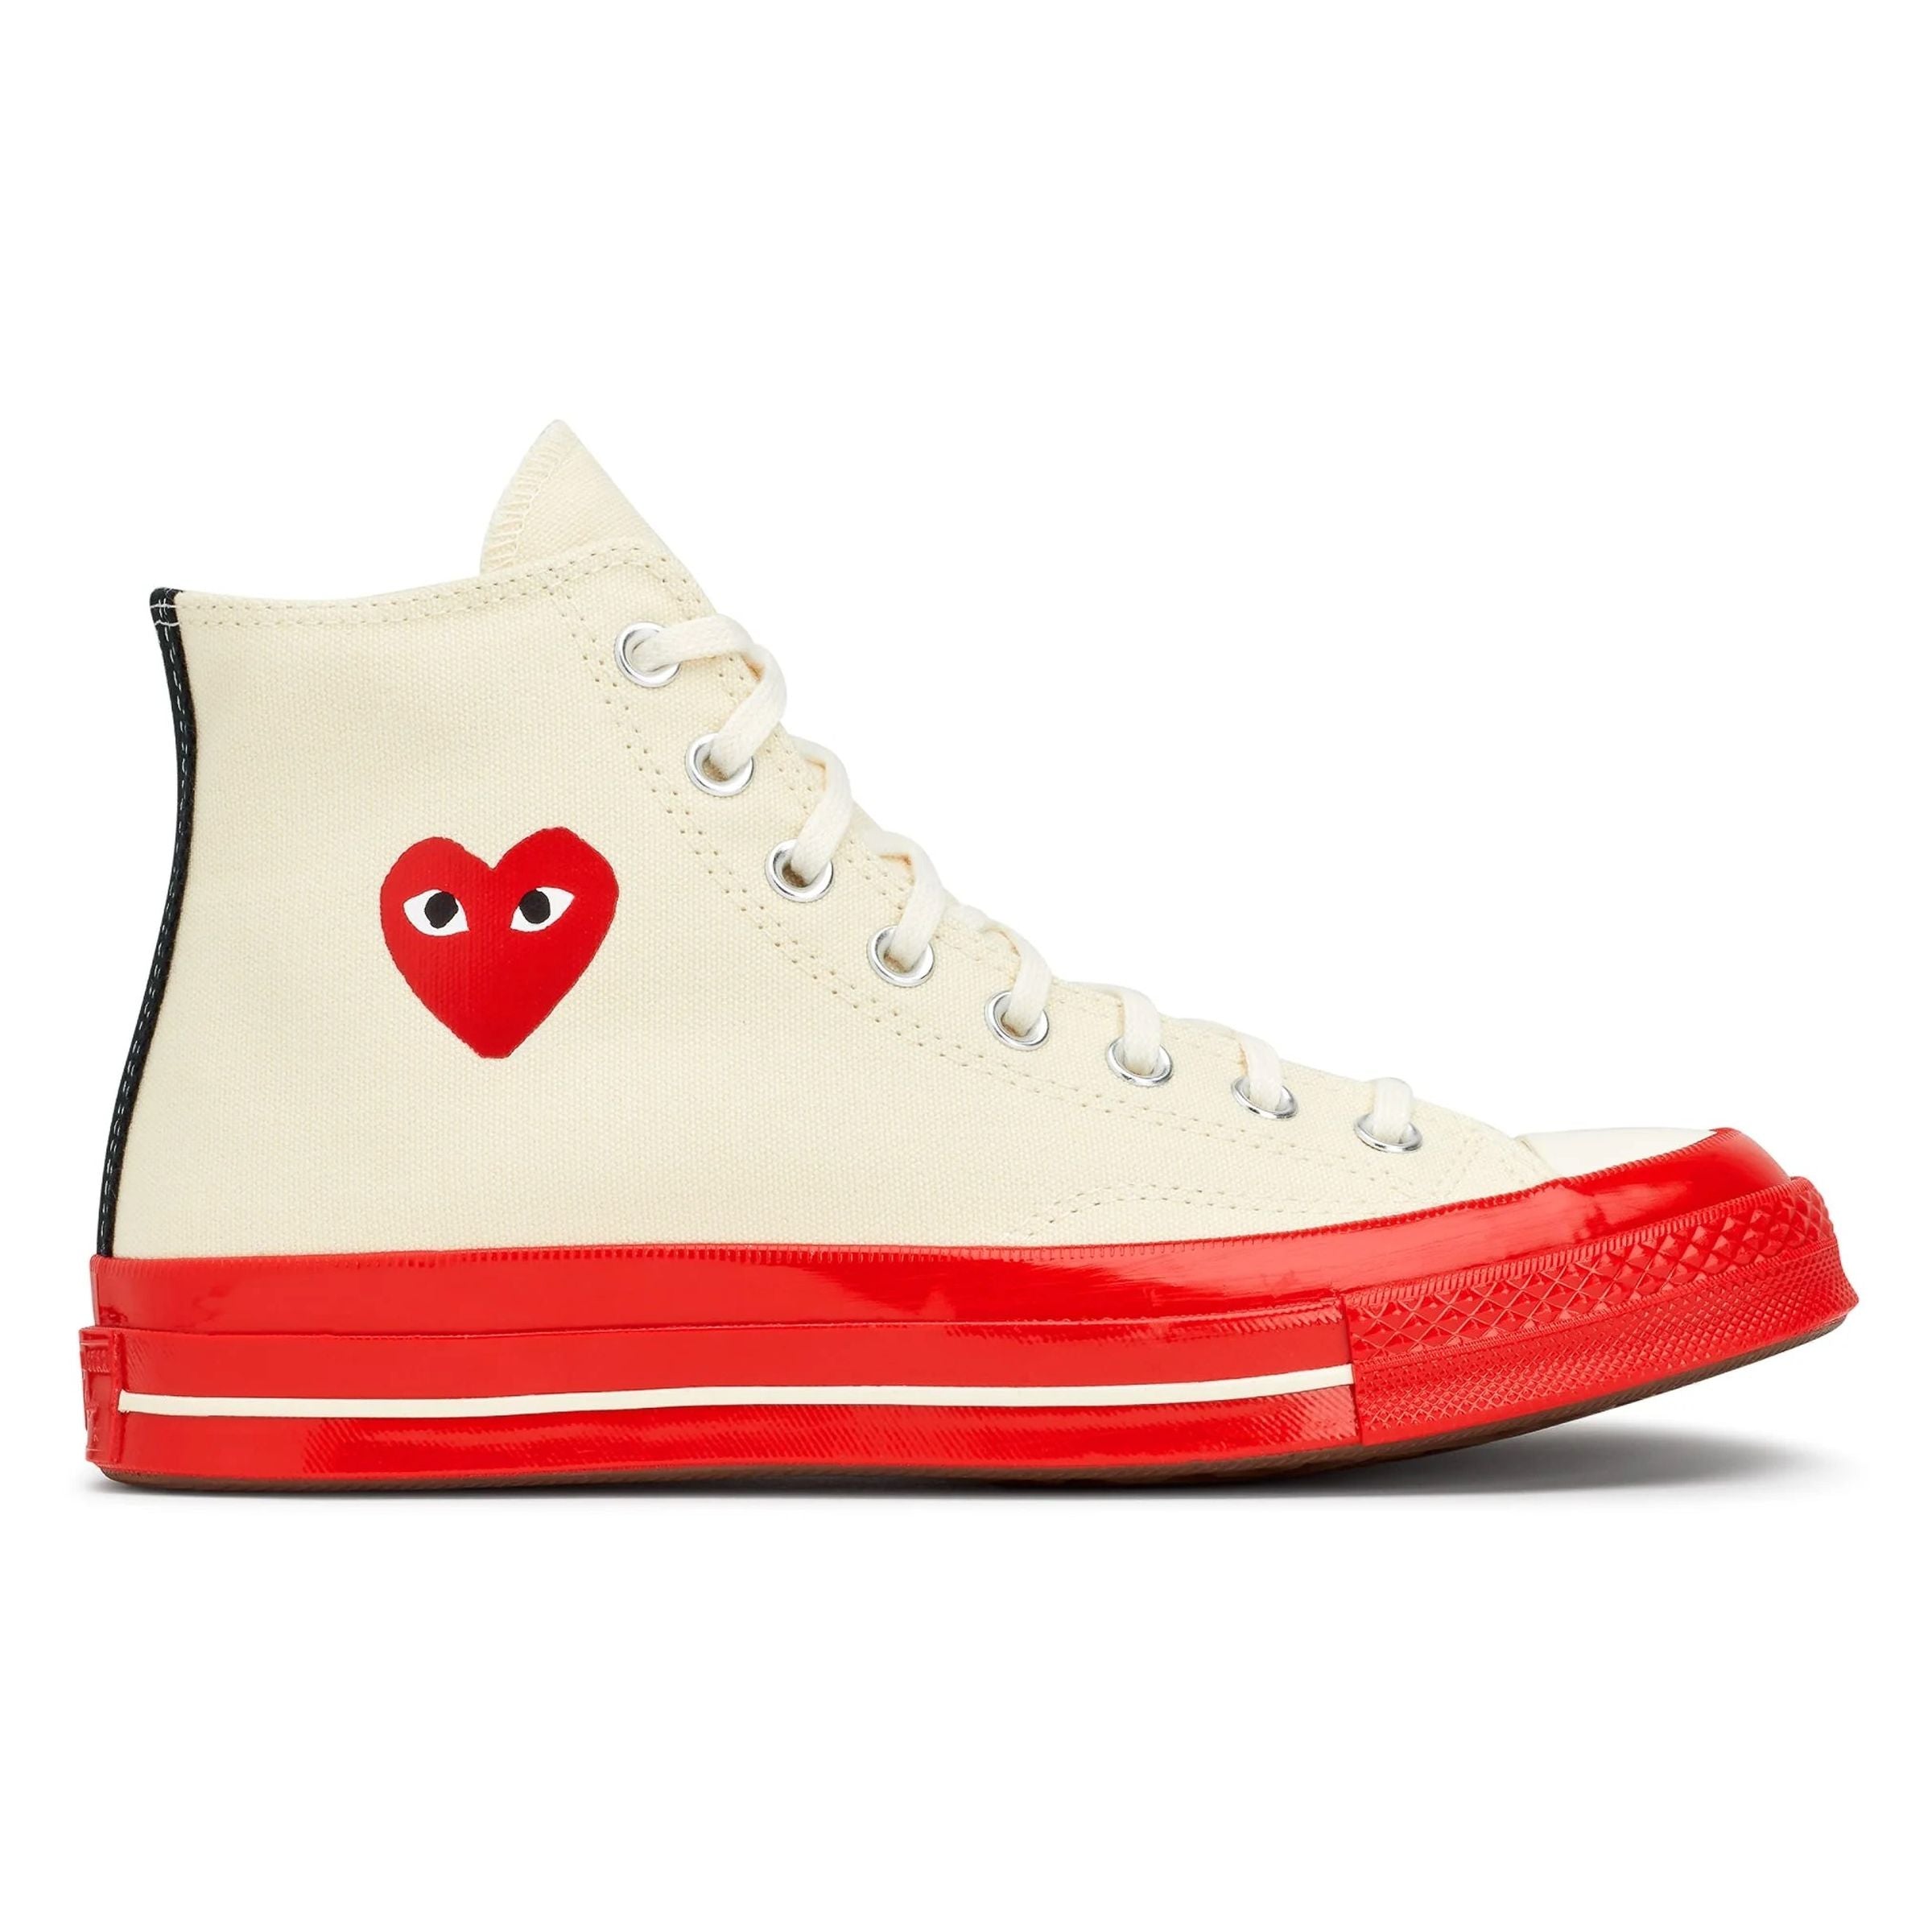 Converse High - kids atelier Red Top-AZ-K124-001-2-Off CDG-PLAY Sole White